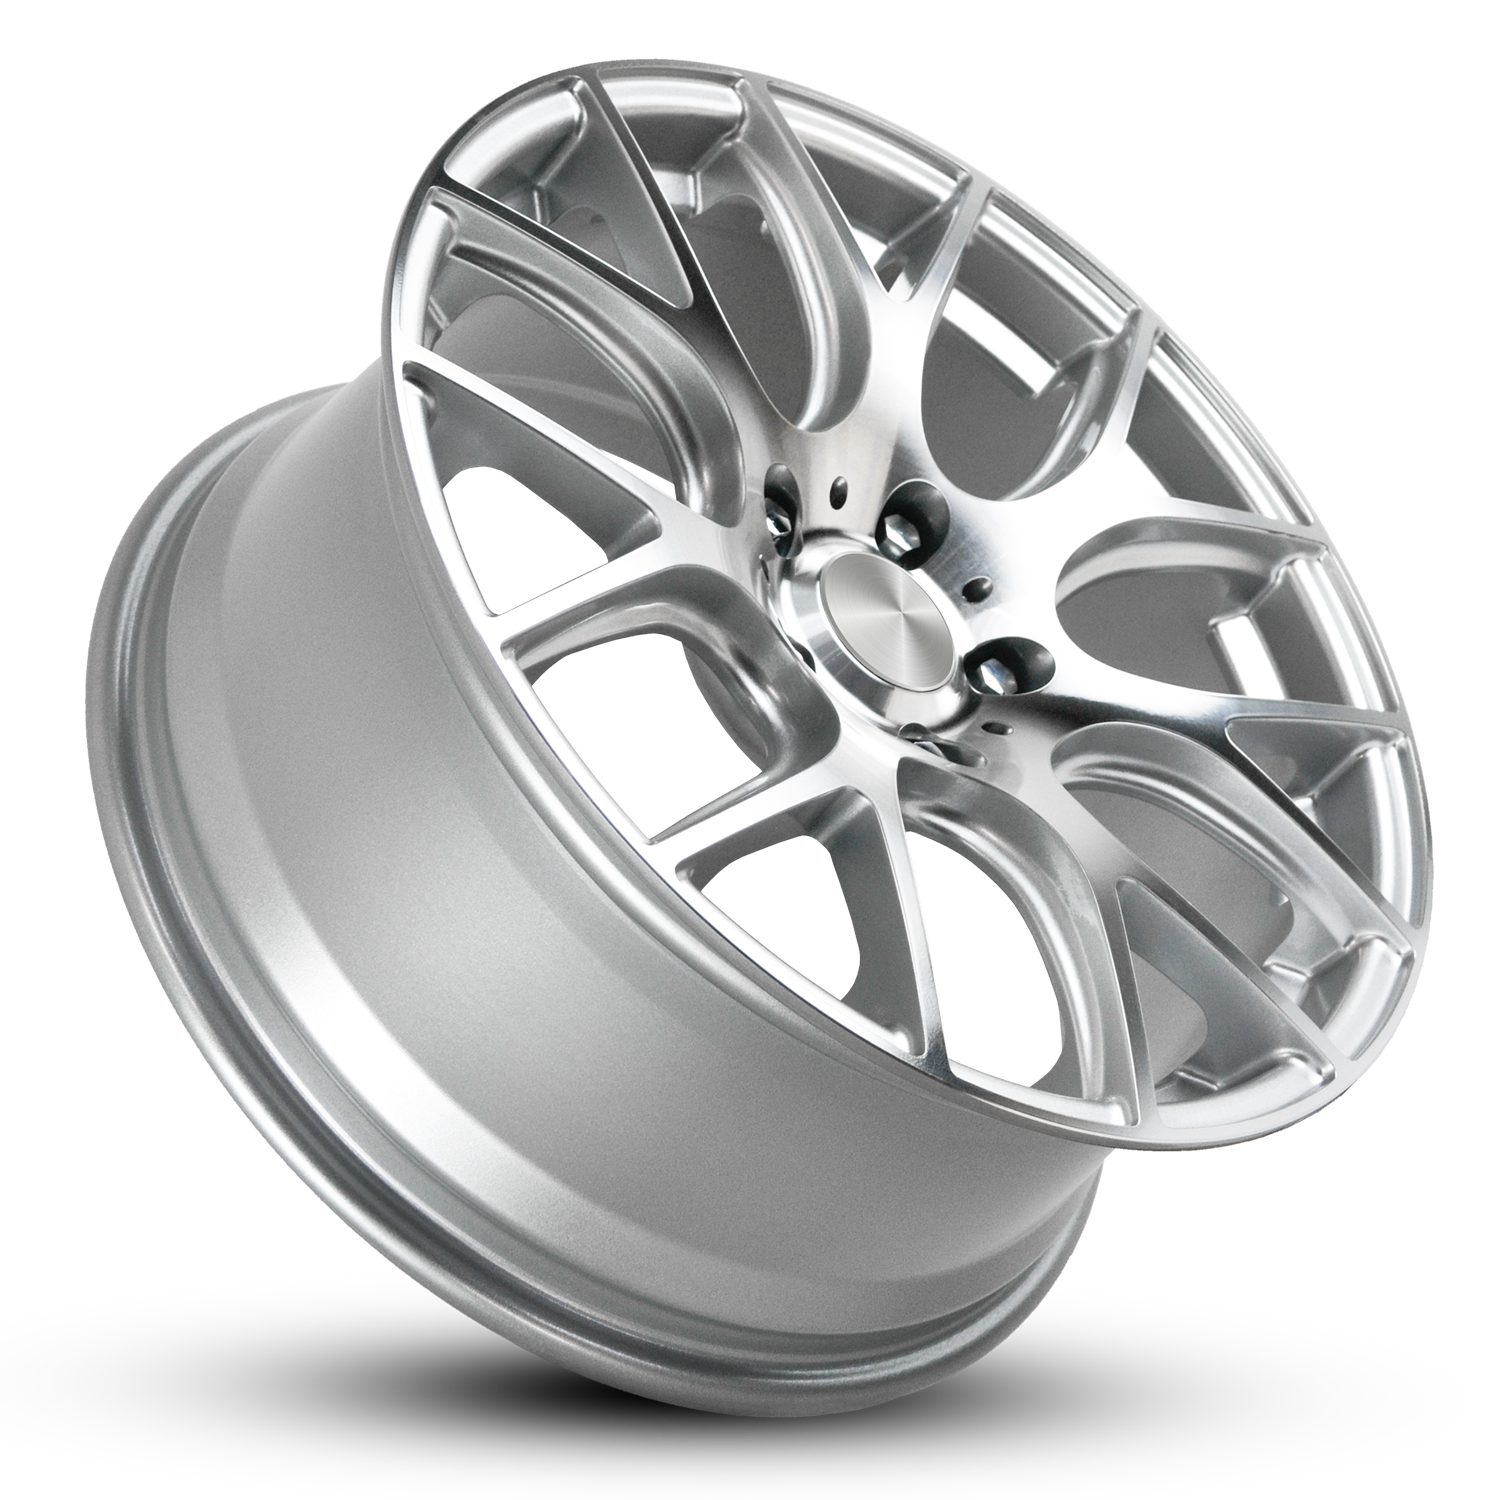 Klassik Rader Model Style 040 in Size 19x8.5 5x112 et35mm Silver with Machined Face Euro Mesh ALZOR MIRO Style Replica for VW Golf GTi, Passat, CC, Audi A4, A6, A8